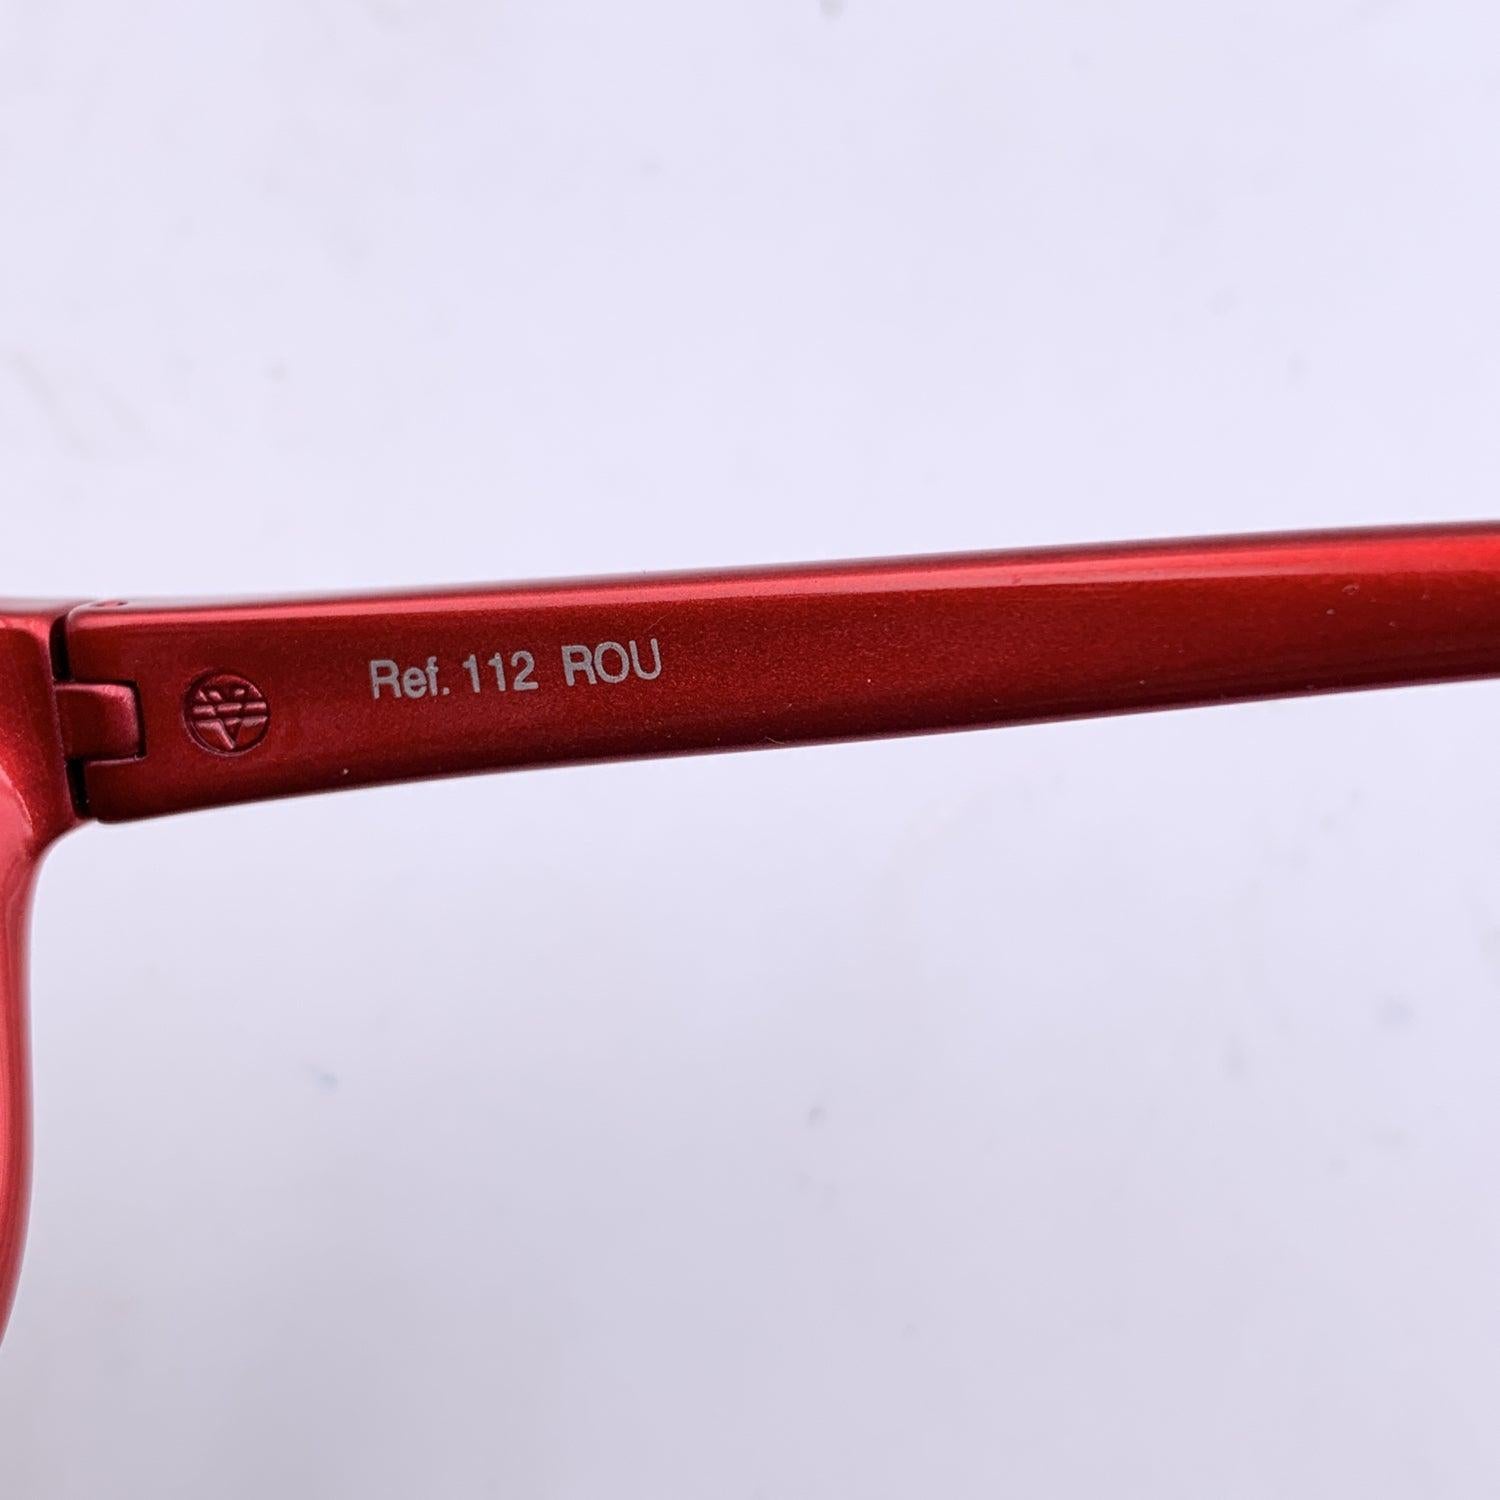 Vuarnet Legend Red 112 Sunglasses PX 2000 Lens 57/20 140 mm In Excellent Condition In Rome, Rome